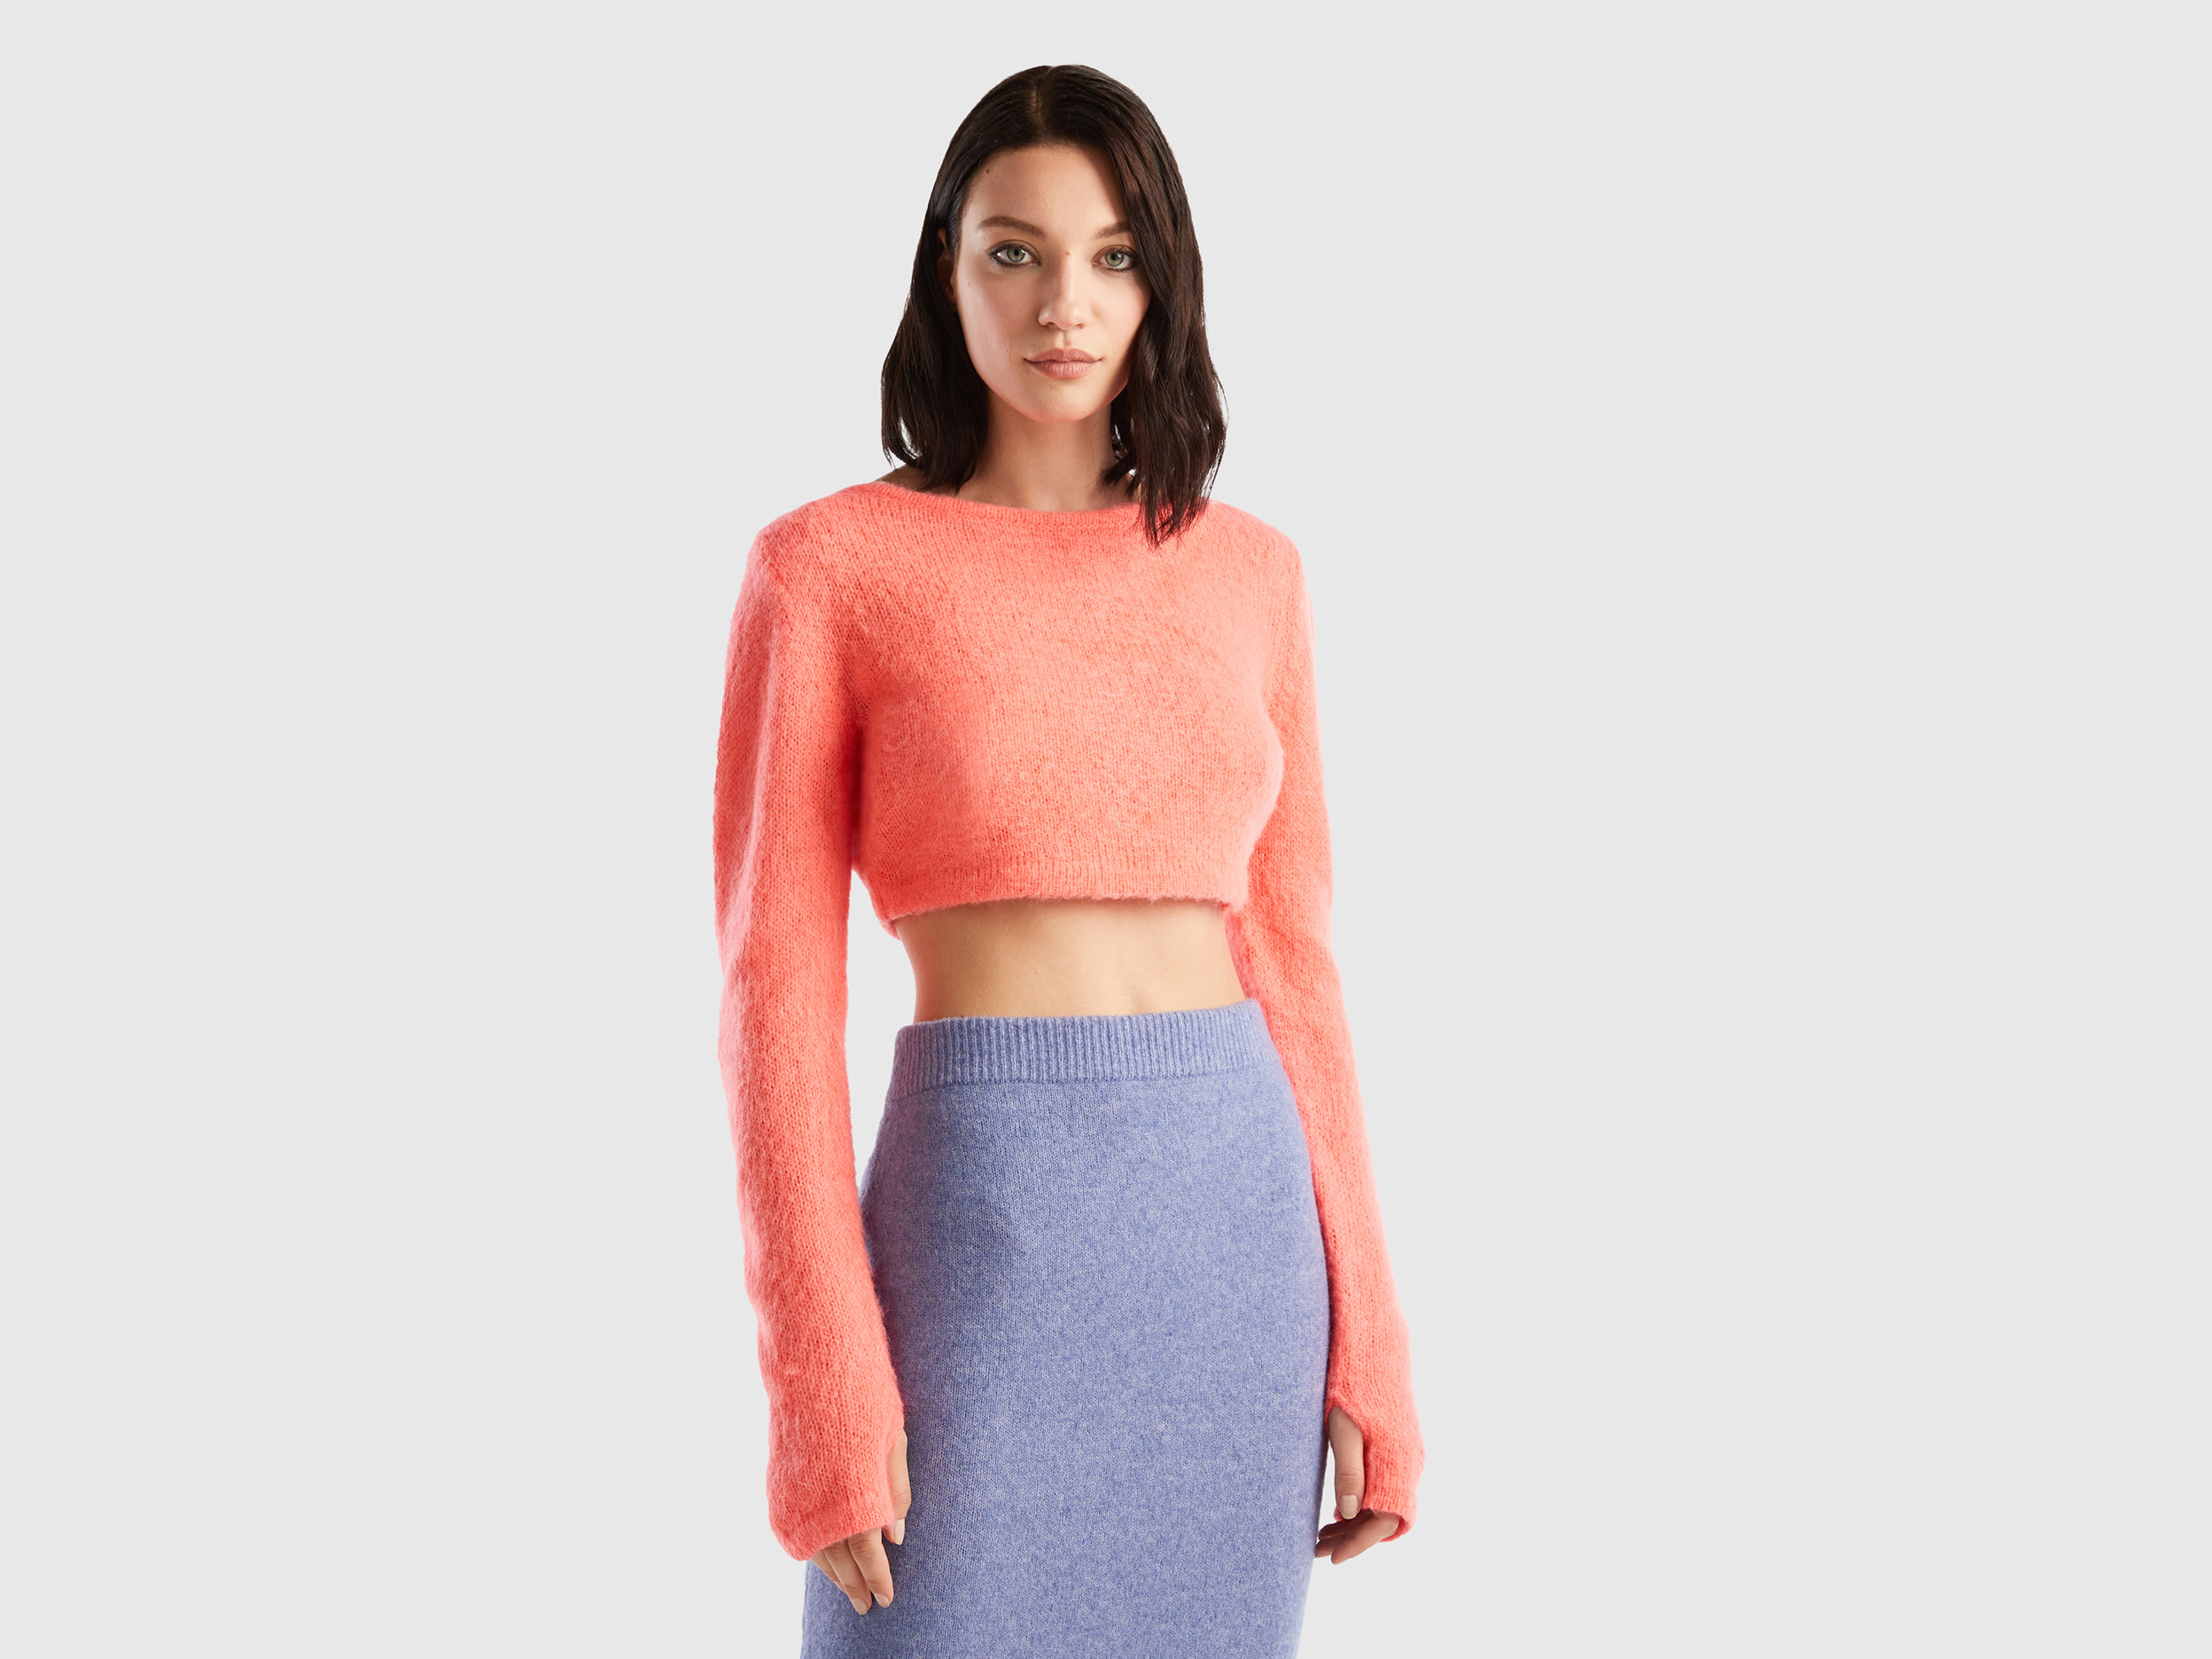 Benetton, Cropped Sweater In Mohair Blend, size M, Salmon, Women